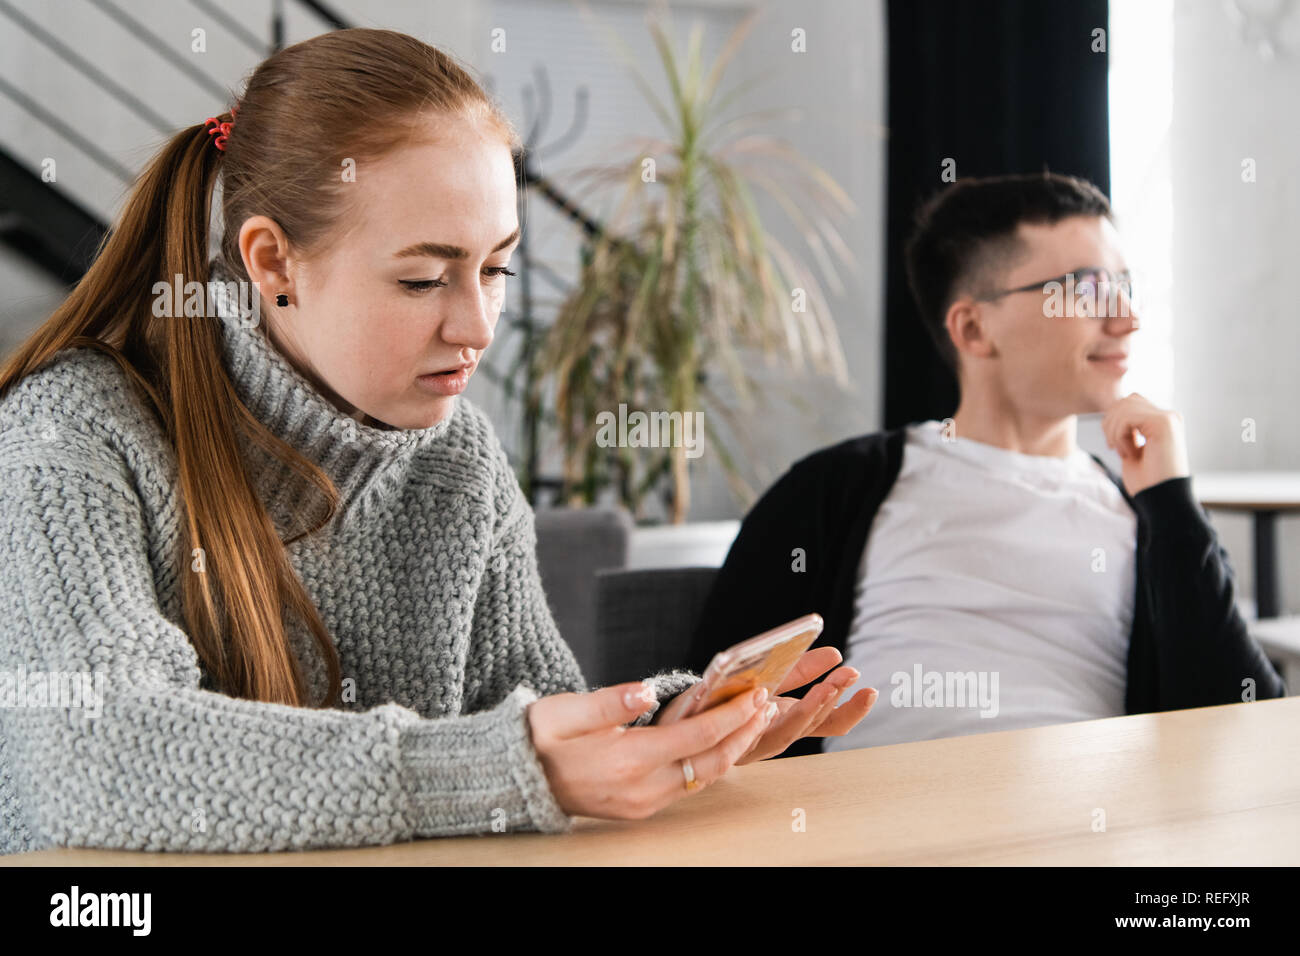 Woman reading her man's cheating messages on his phone Stock Photo